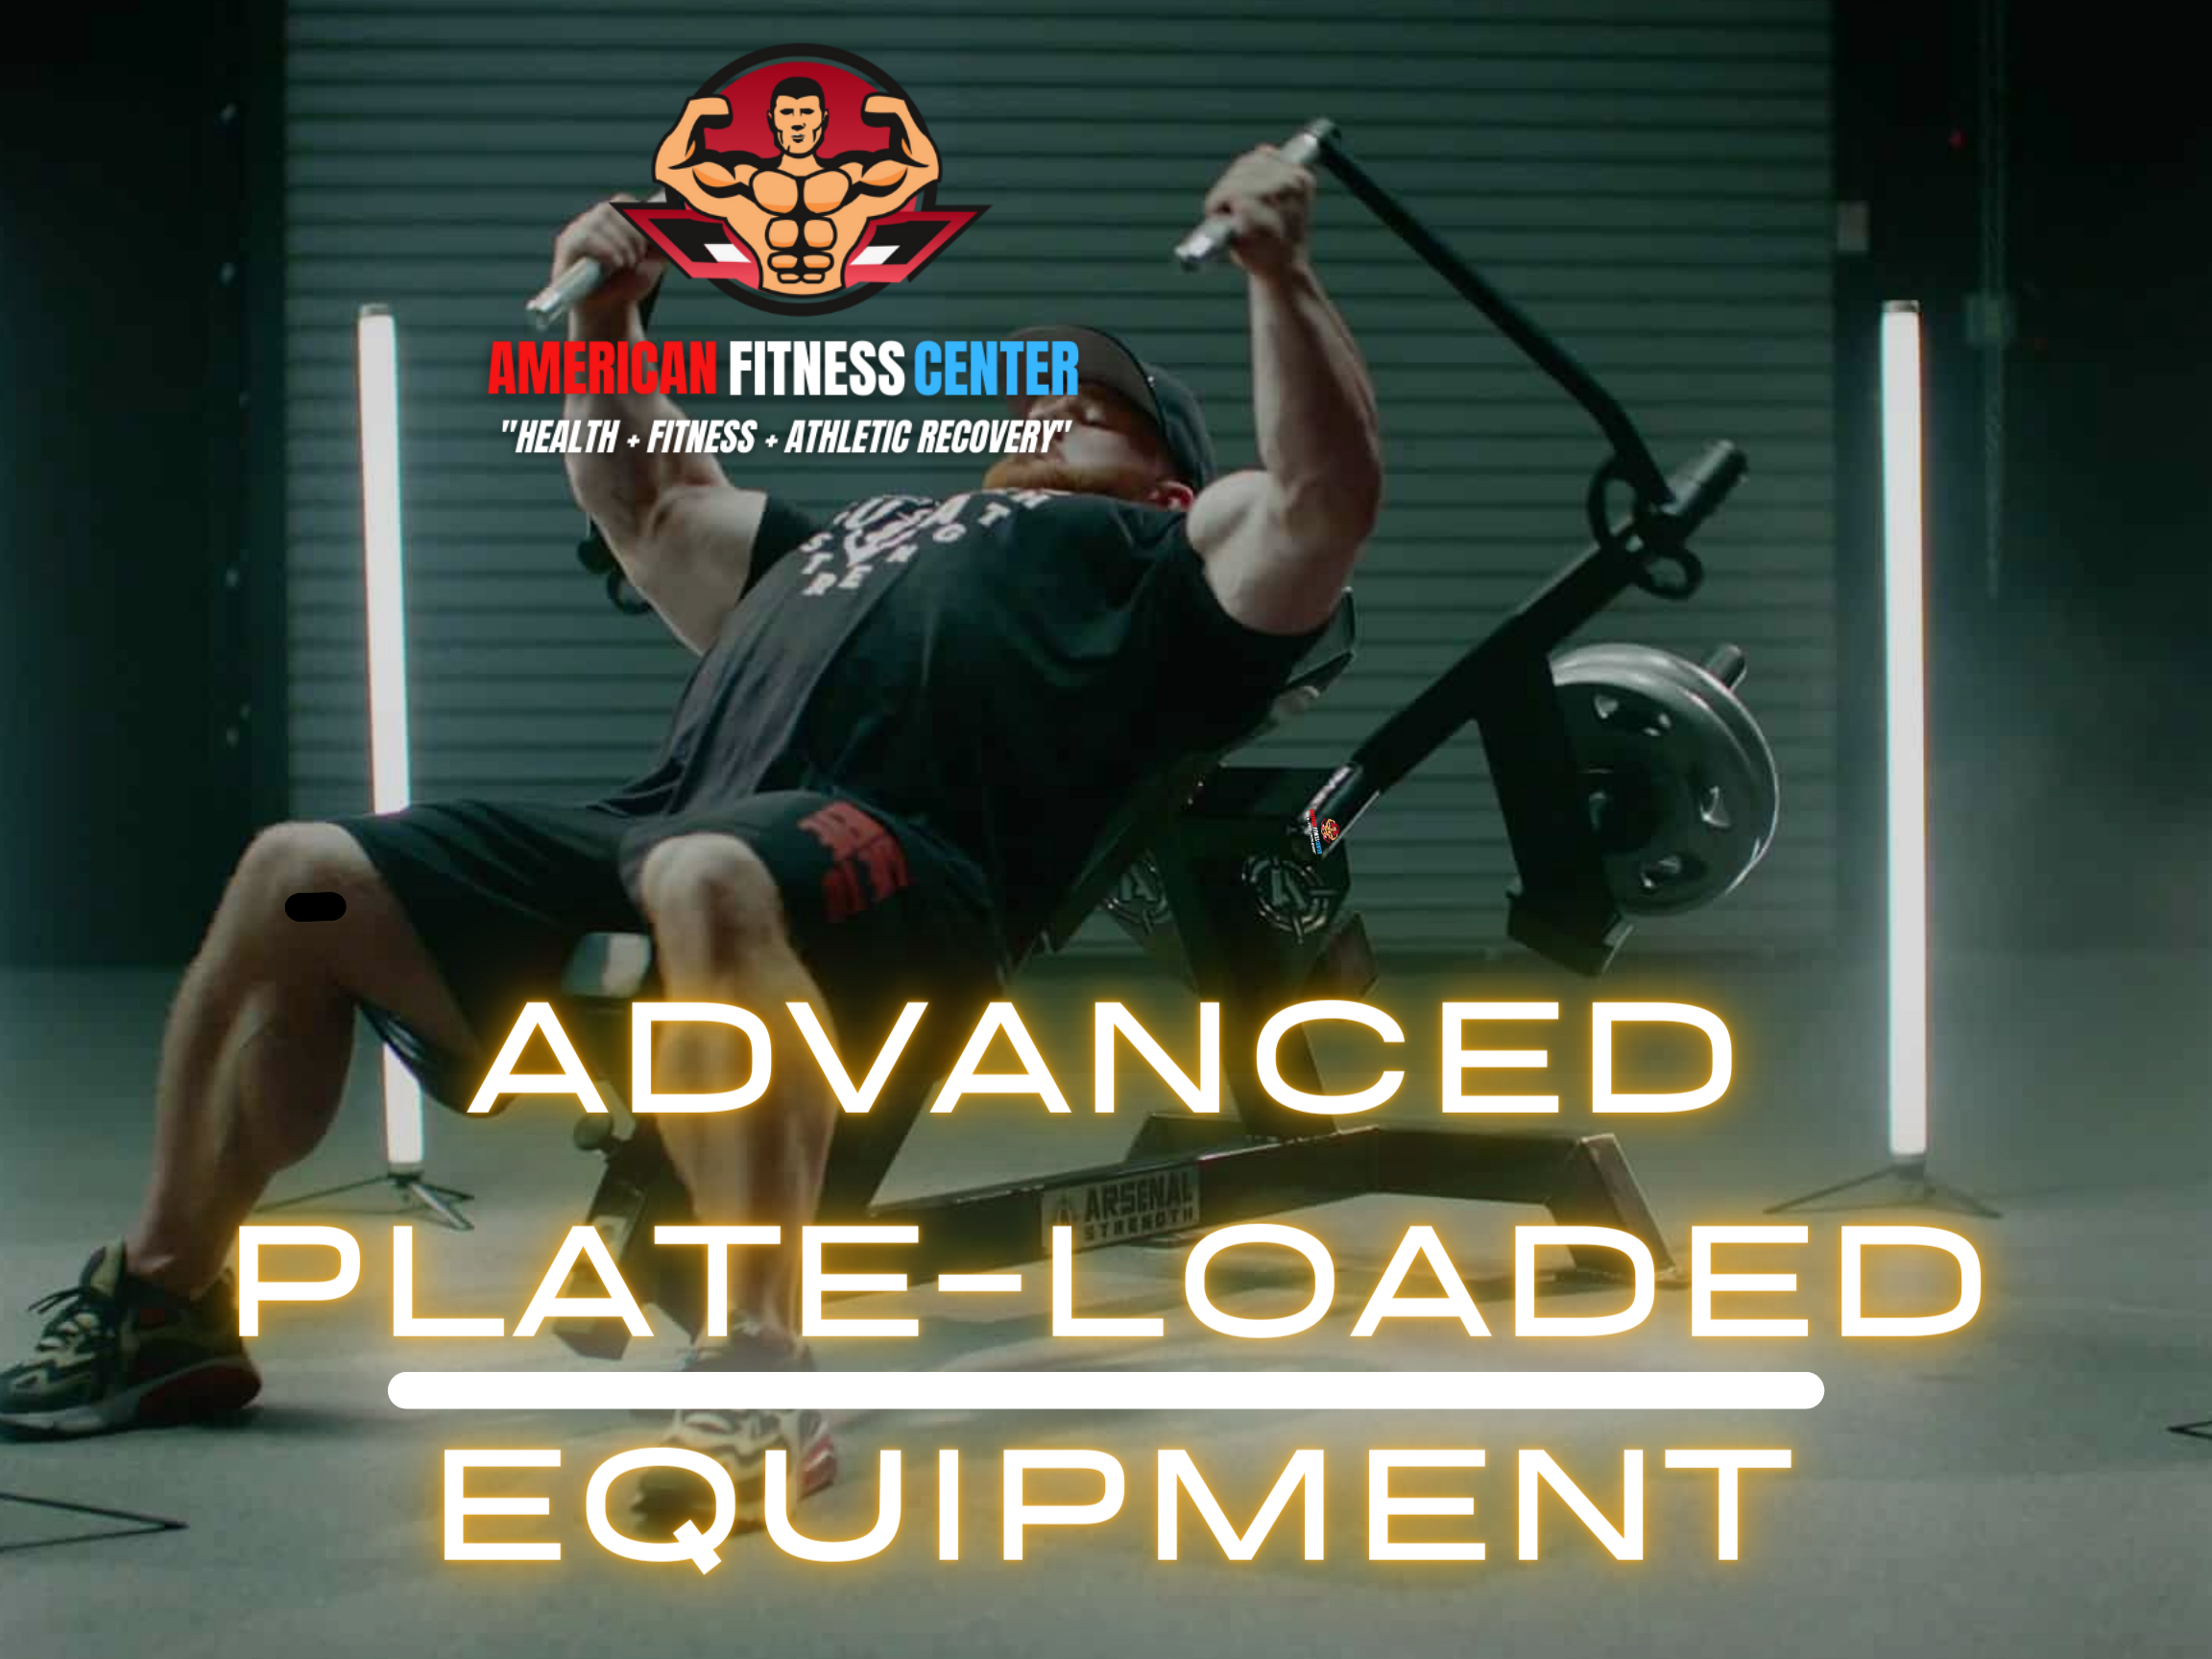 24-Hour-Gym-With-Advanced-Plate-Loaded-Equipment-in-Snellville-GA-American-Fitness-Center-Snellville